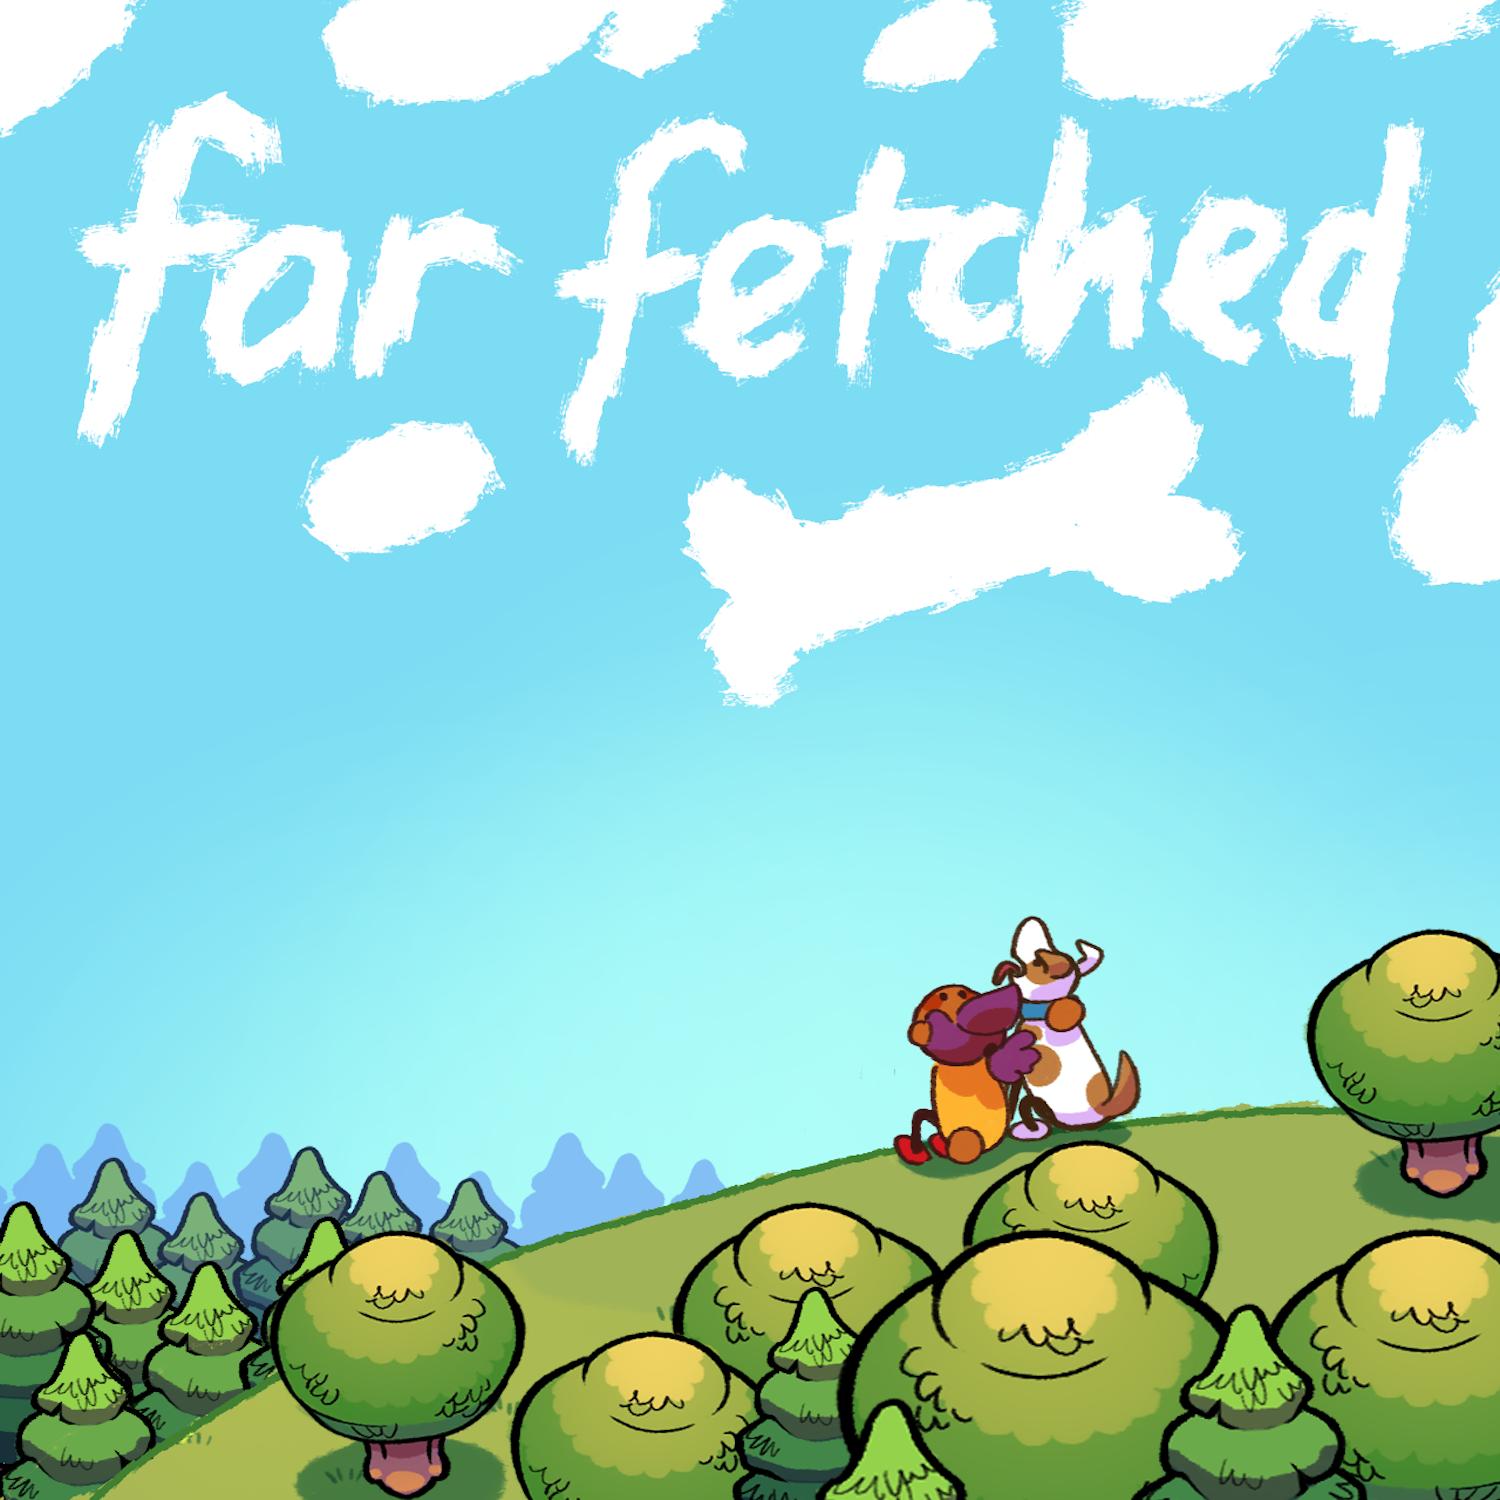 Far fetched. Further ost